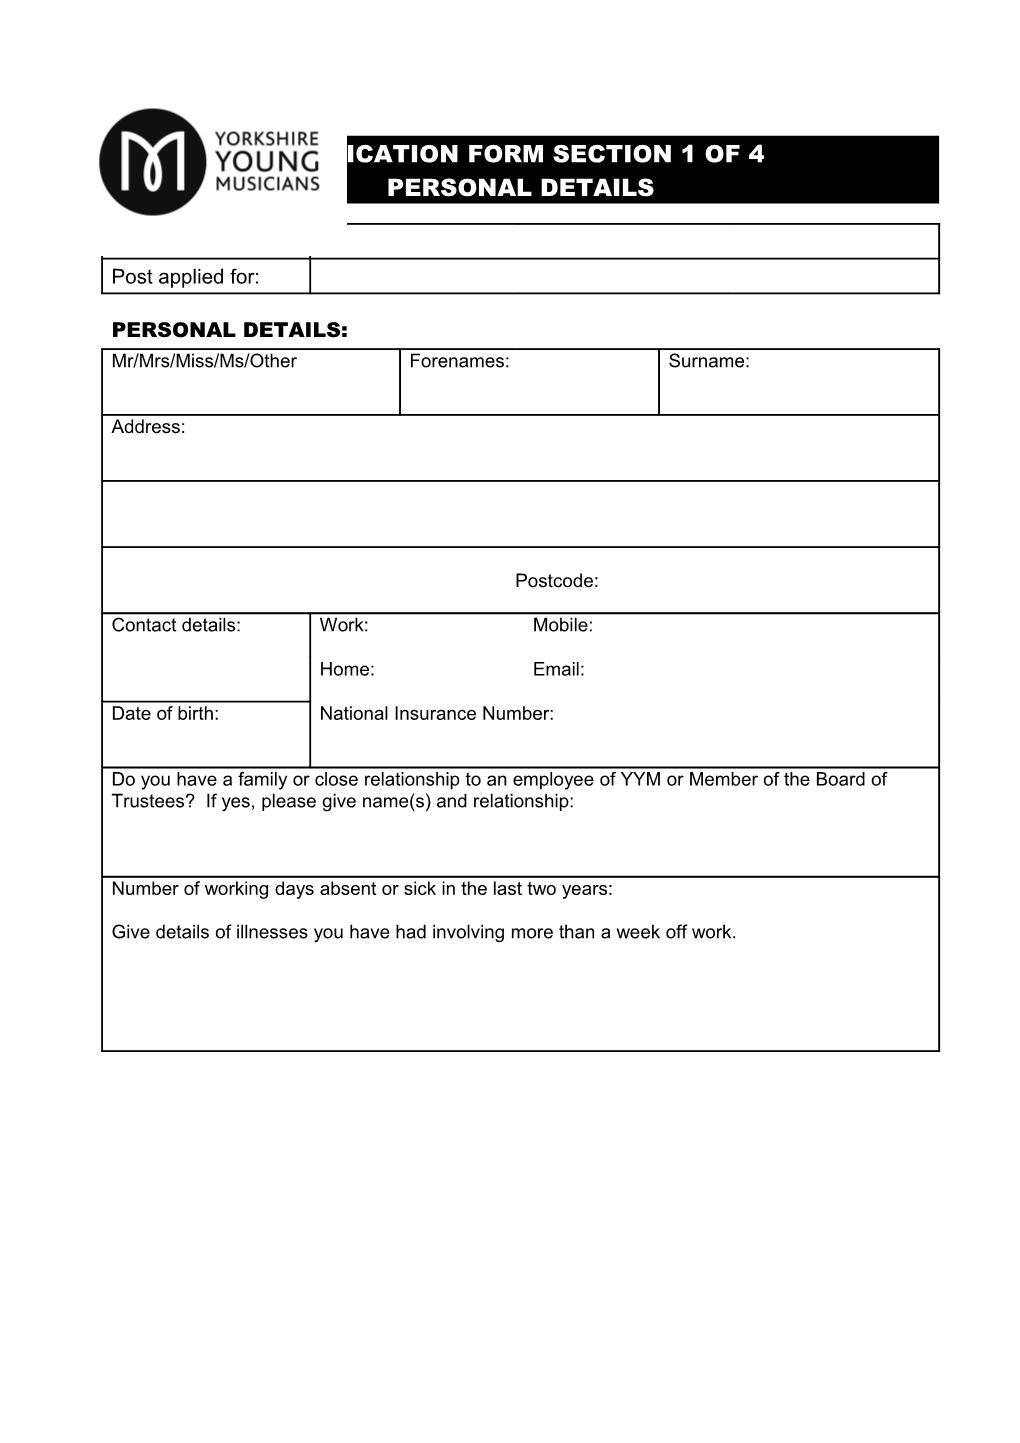 Application Form Section 1 of 4